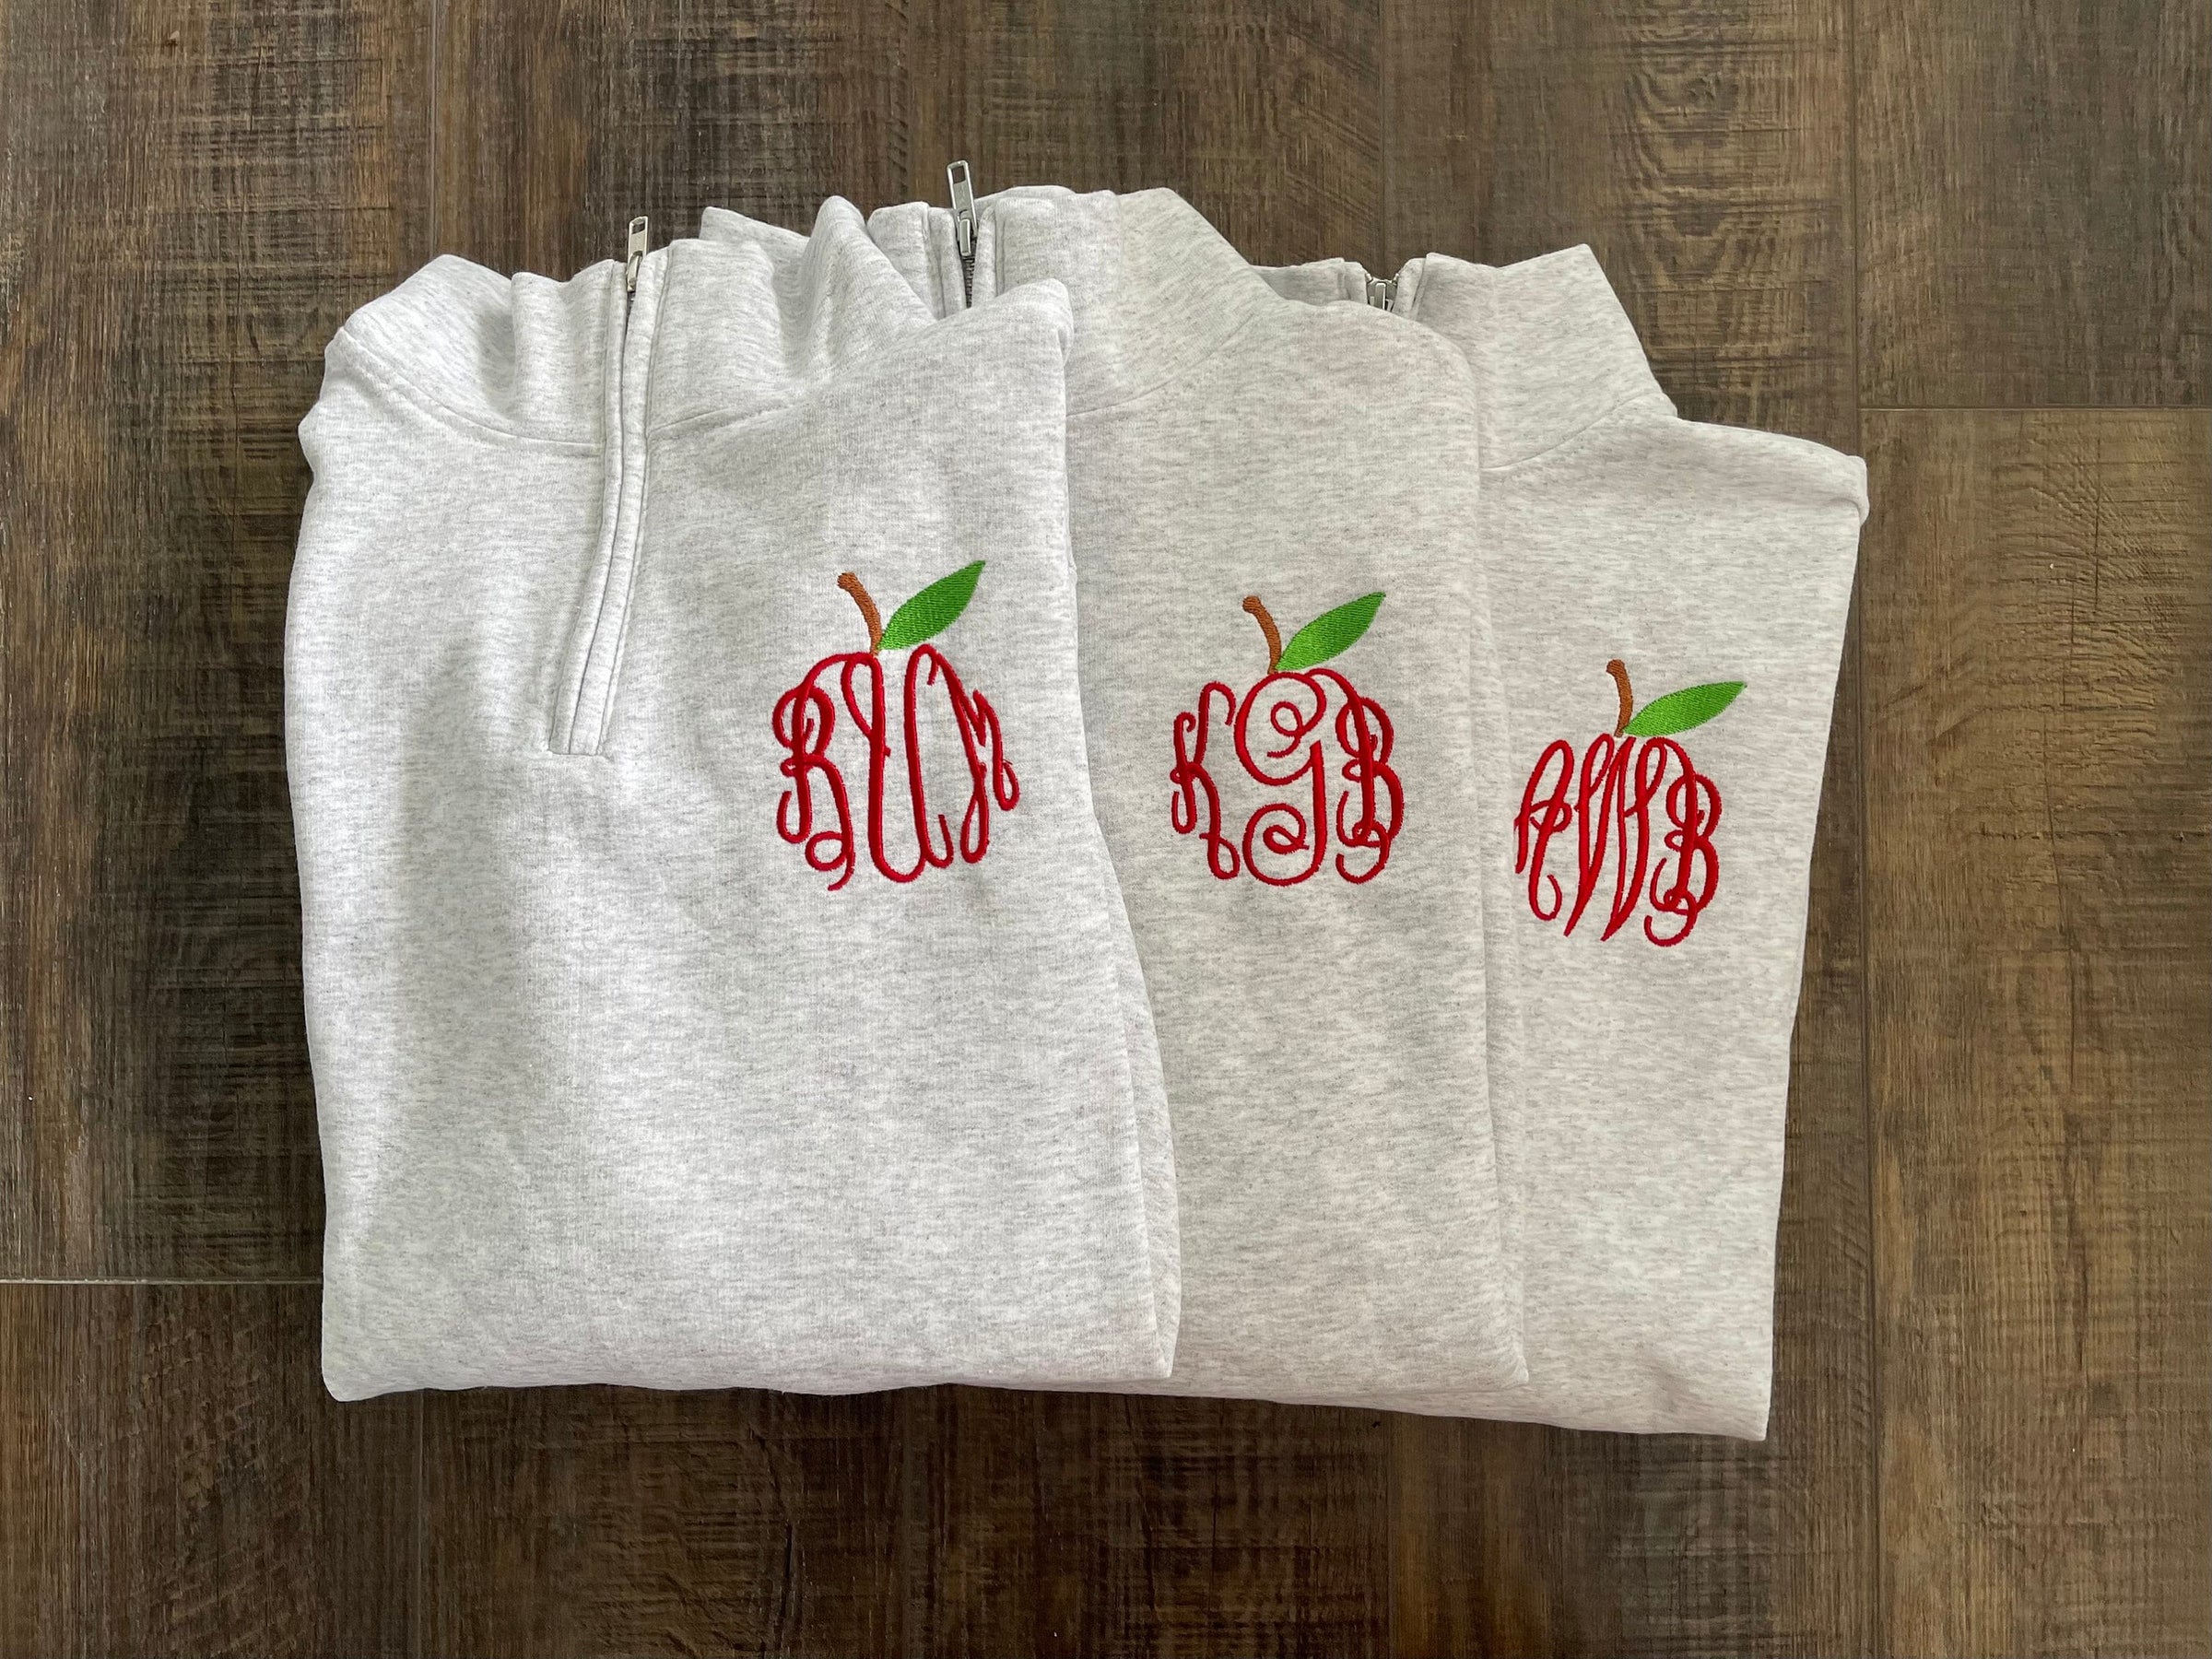 Women's Personalized Embroidered Monogram Quarter Zip Sweater